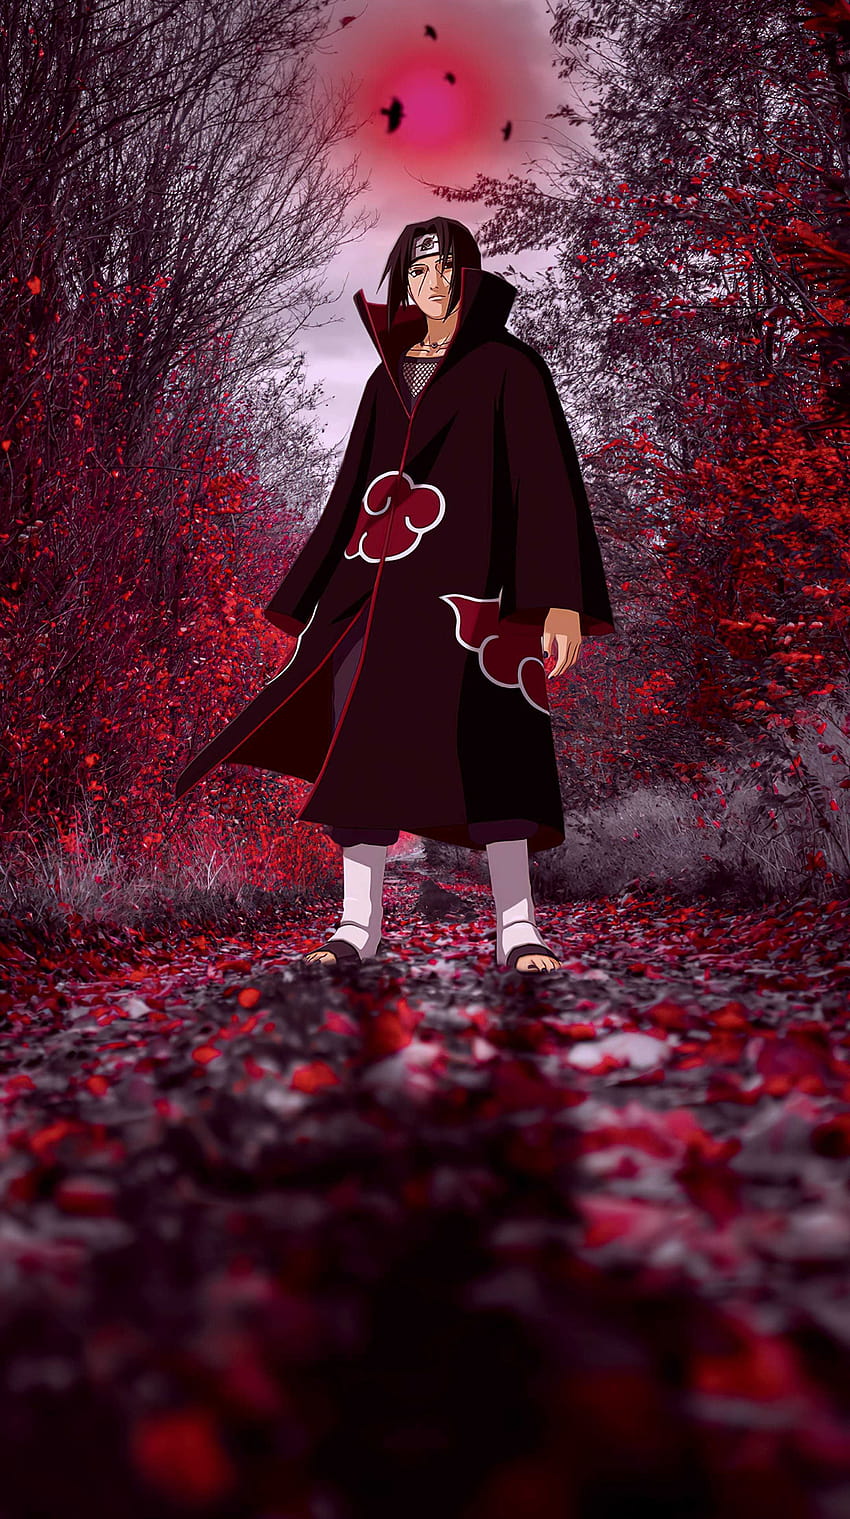 10 Badass Itachi Uchiha Wallpapers for iPhone And Android  Page 5 of 5   The RamenSwag